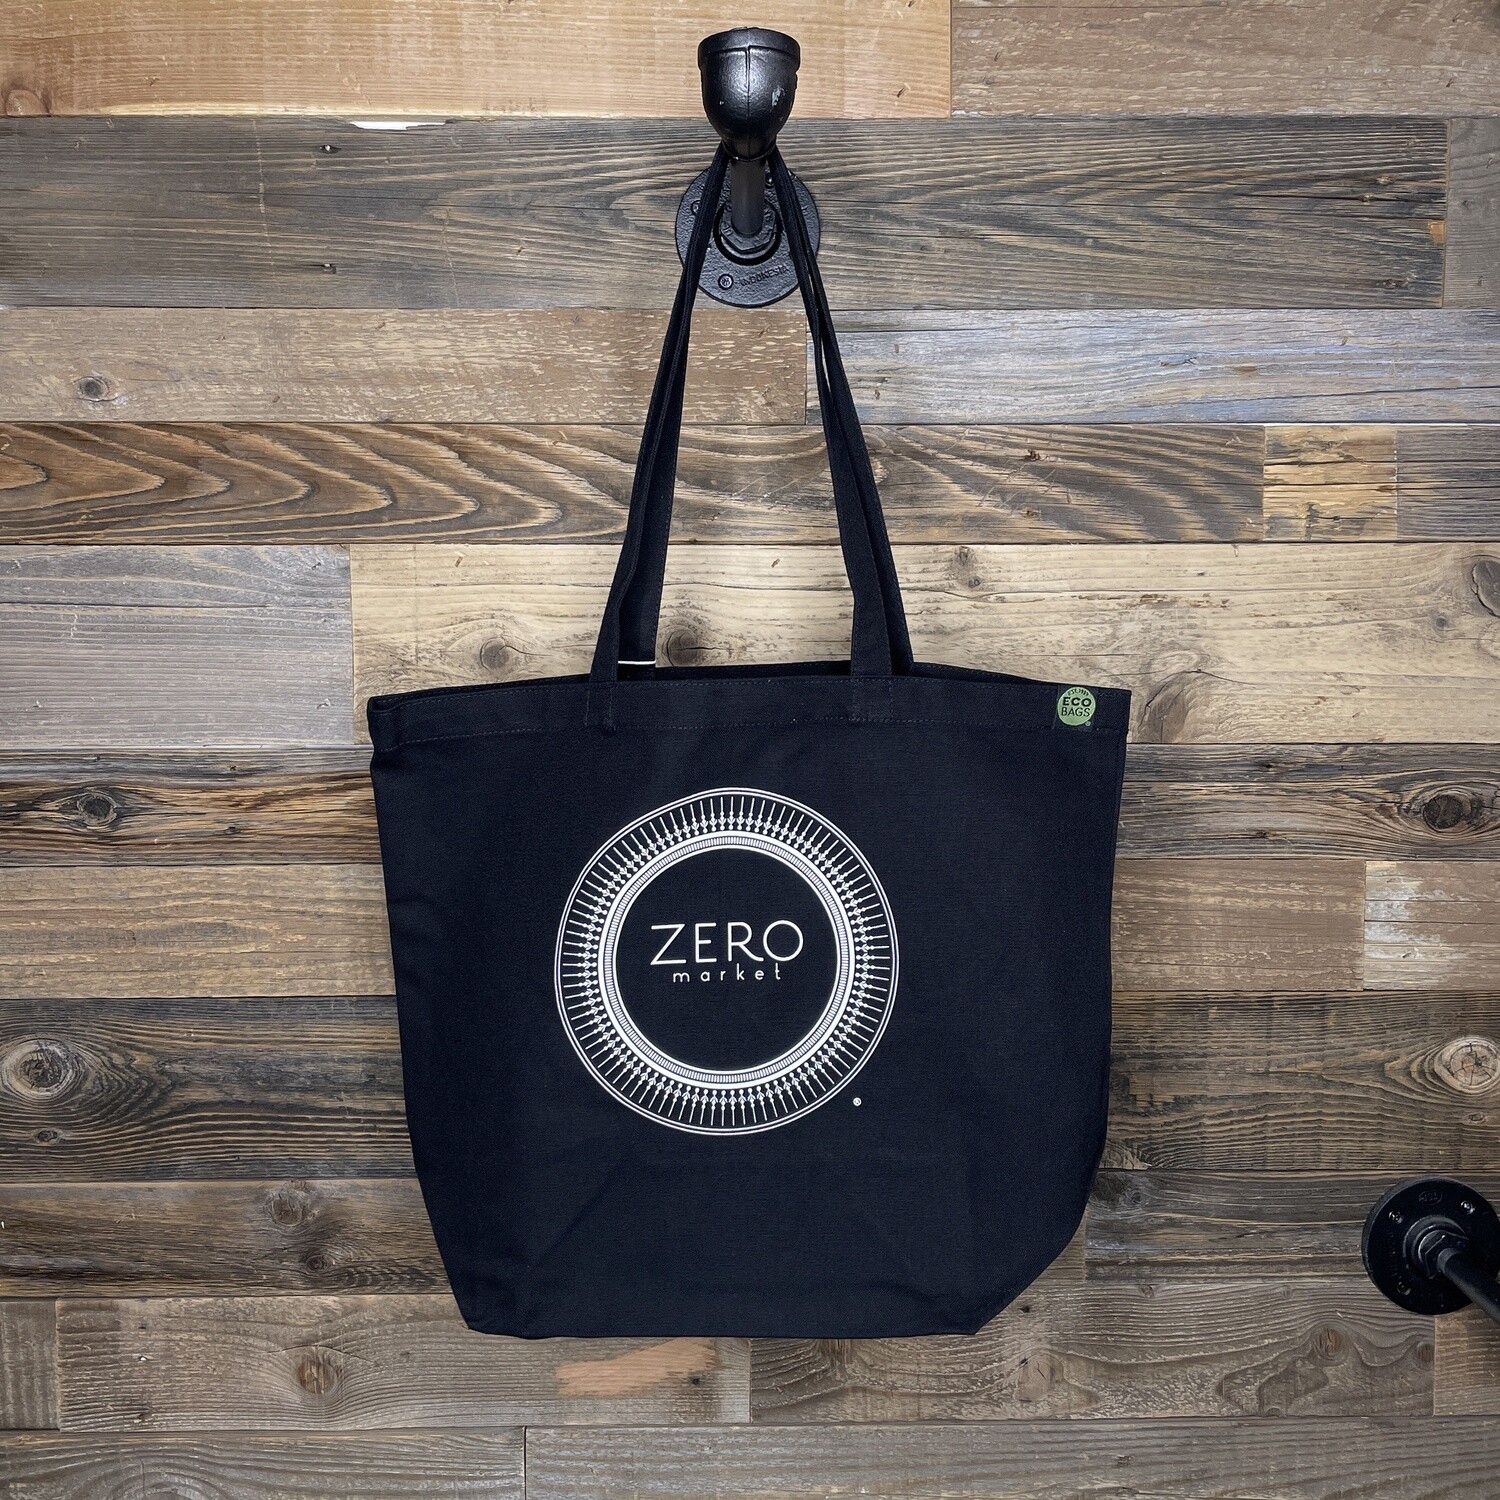 Tote Bag Deluxe with Bottle Dividers